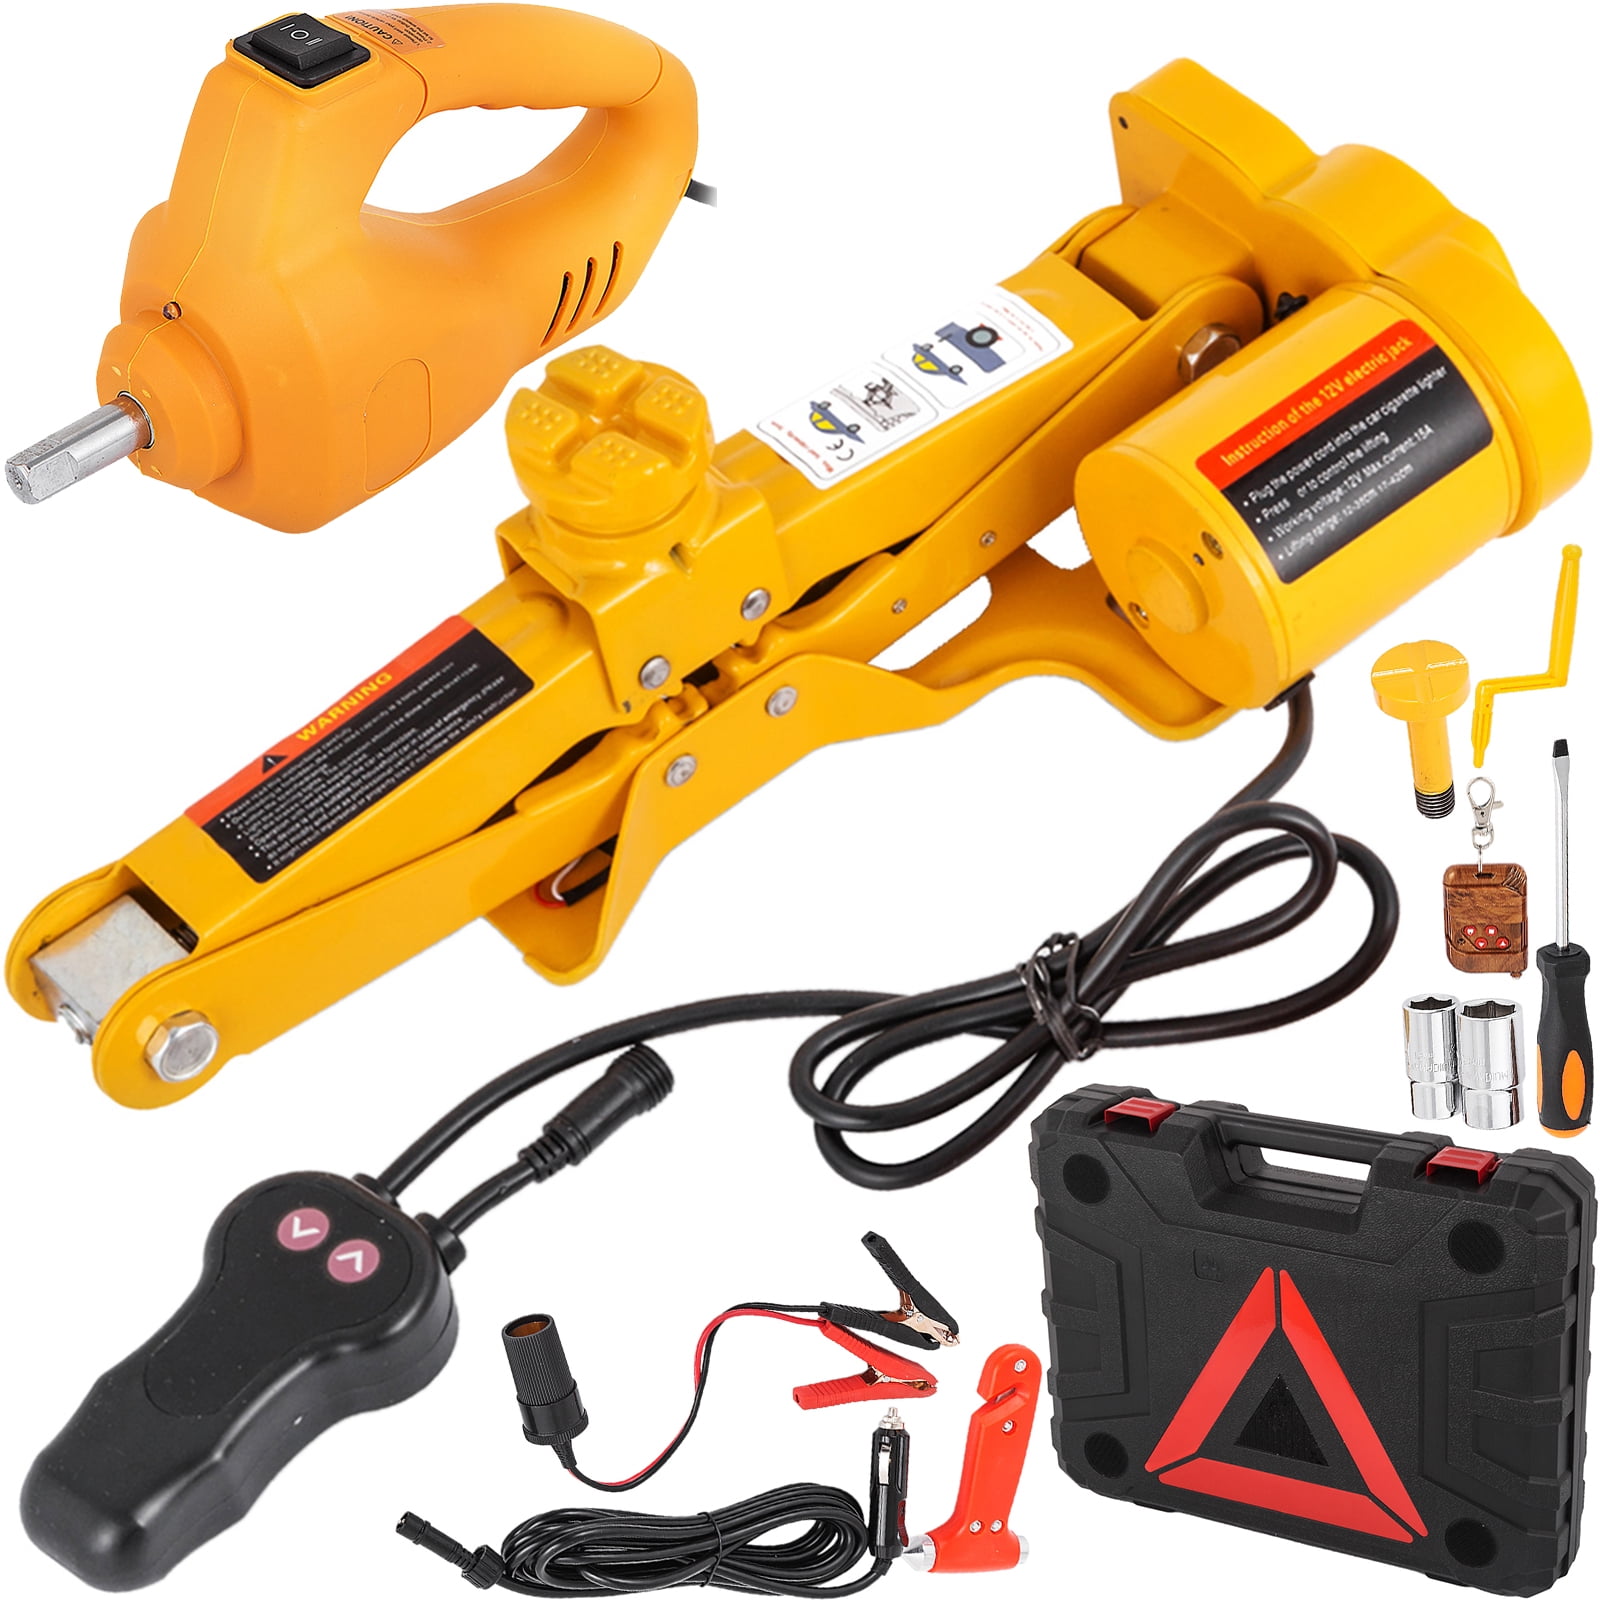 12V DC 3T Electric Hydraulic Floor Jack Lift Lifting Set with Impact Wrench 